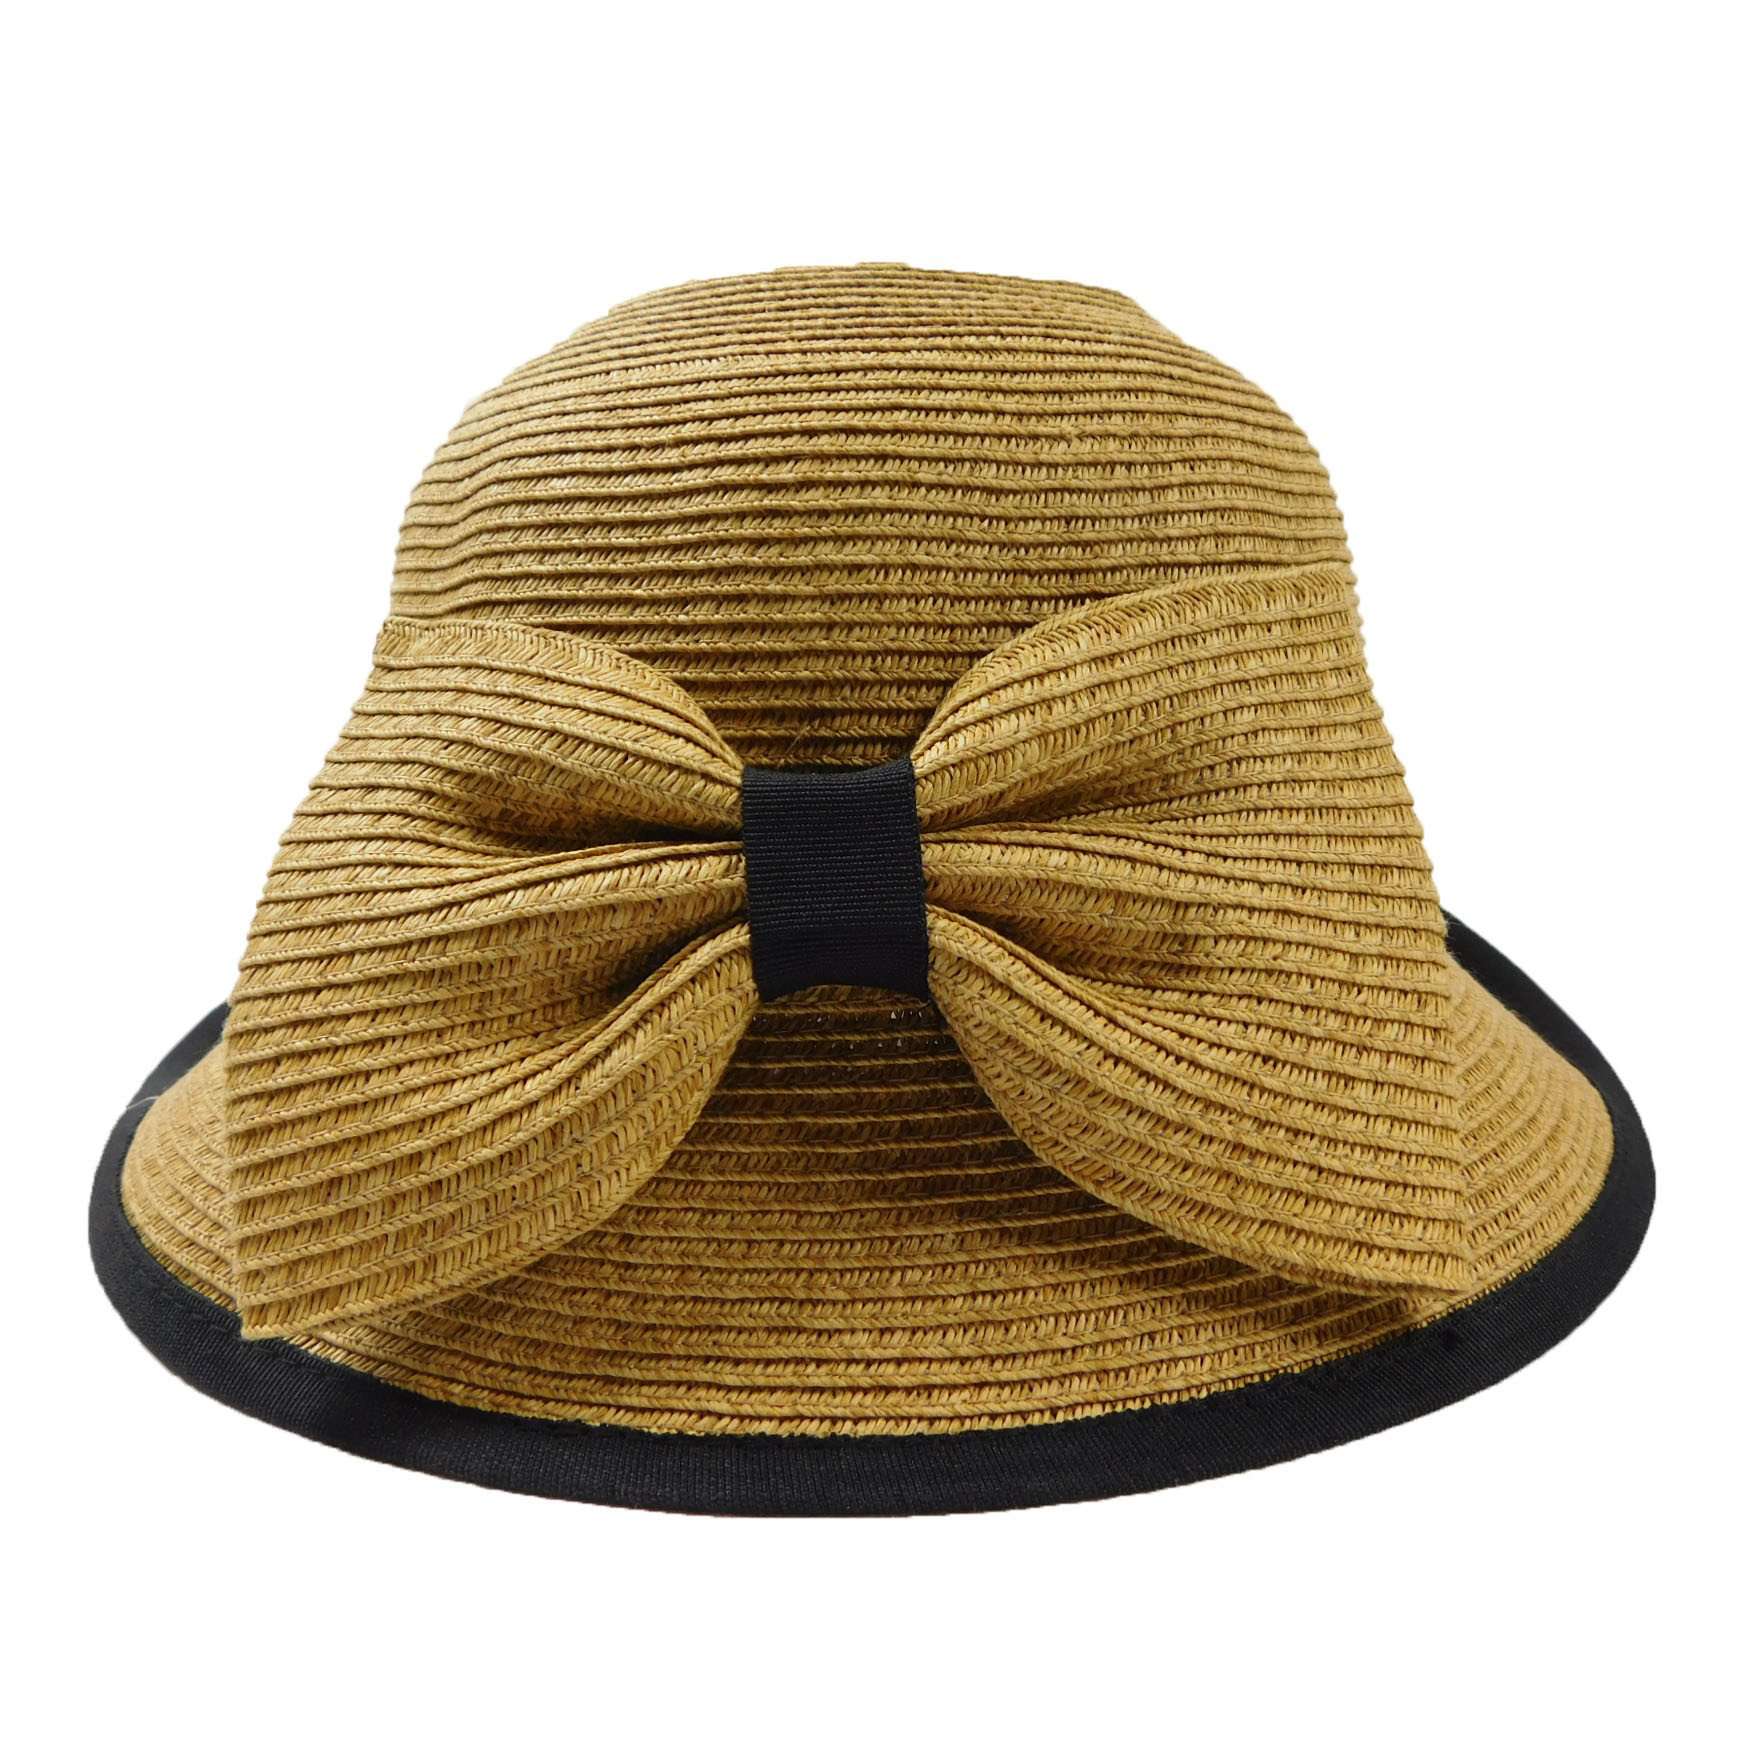 Straw Bucket Hat/Cloche with Large Bow, Cloche - SetarTrading Hats 